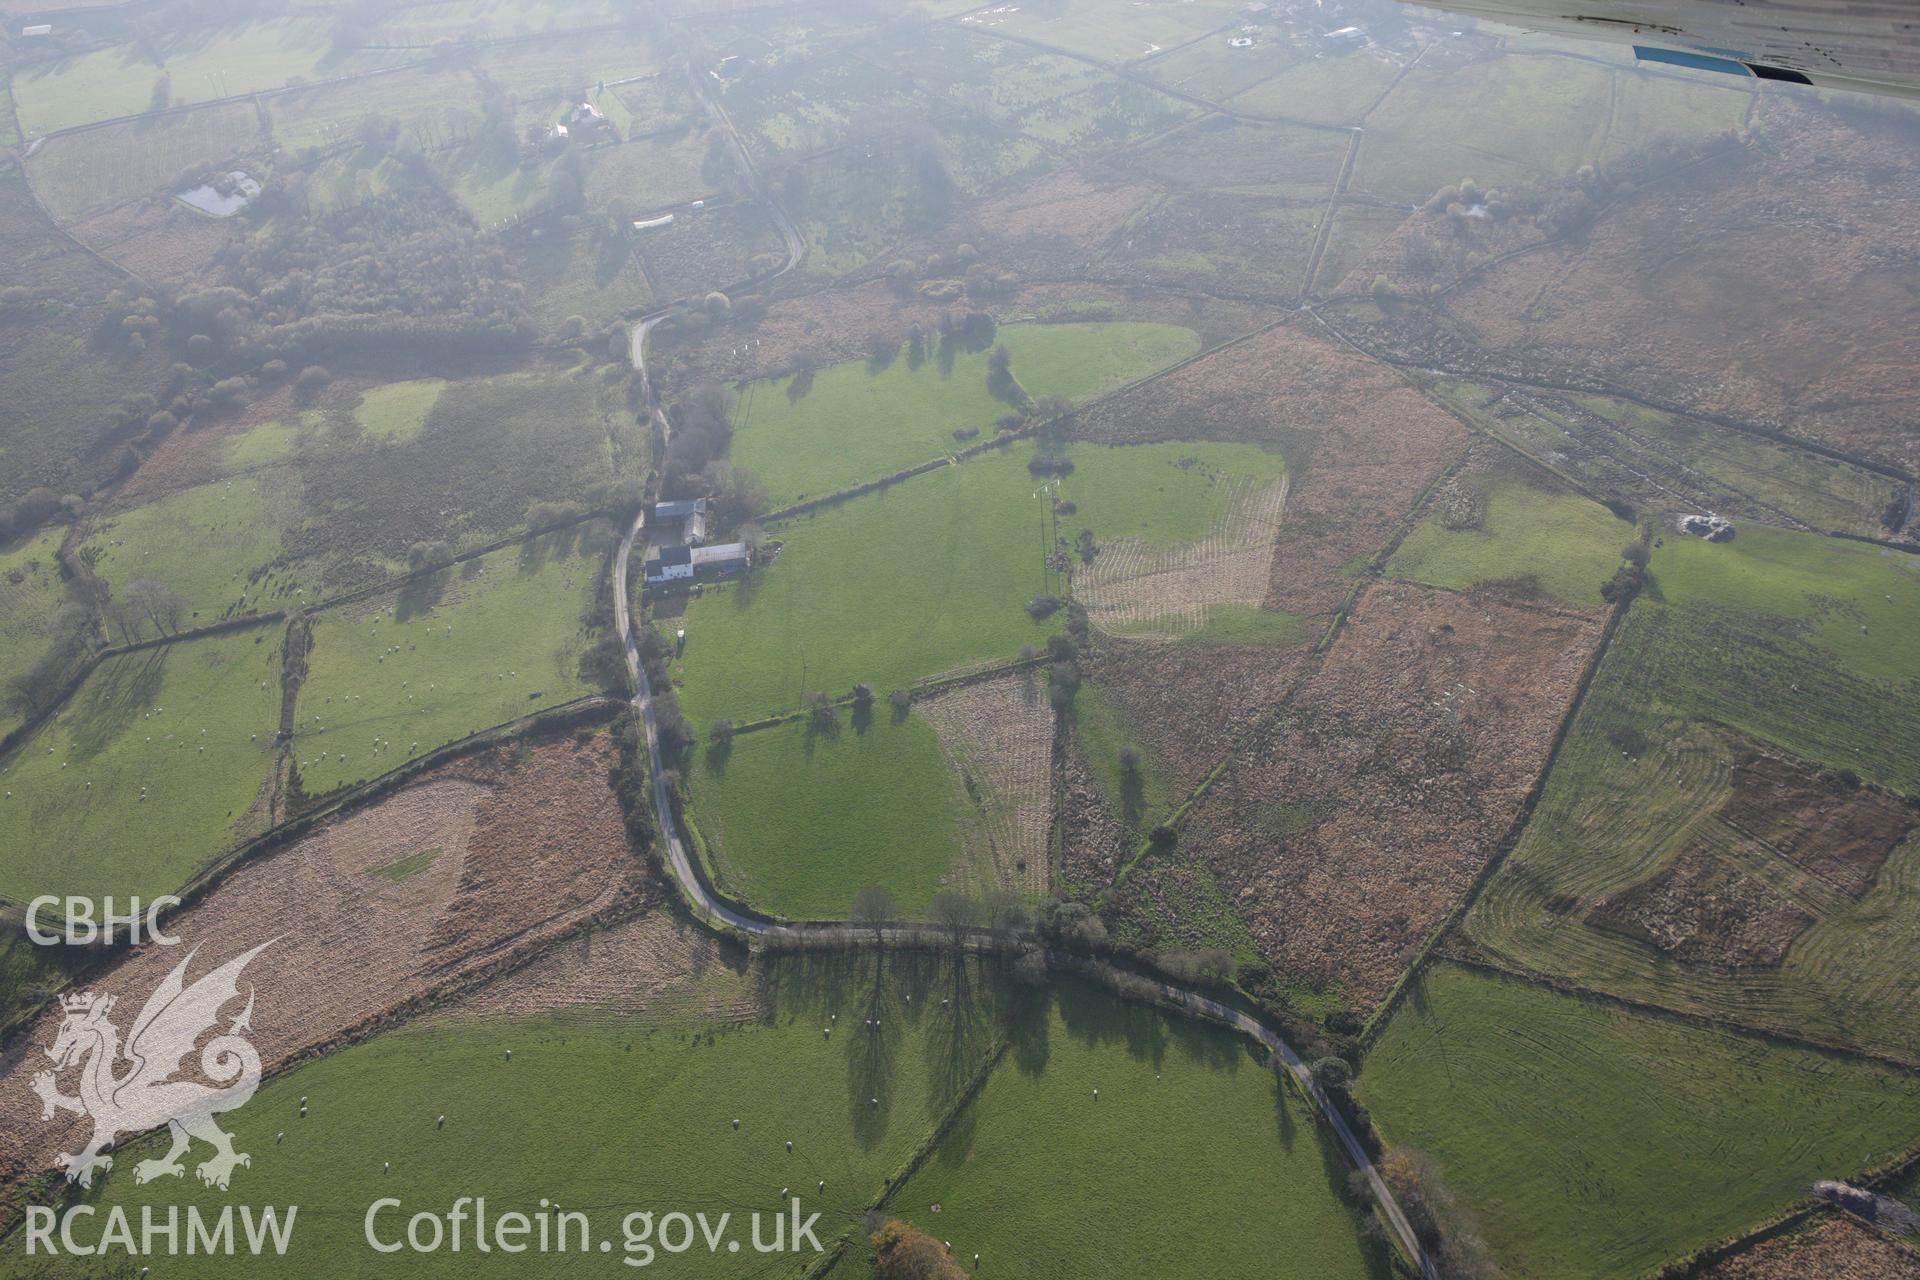 RCAHMW colour oblique aerial photograph of Sarn Helen Roman Road section at Rhyd Fudr. Taken on 09 November 2009 by Toby Driver